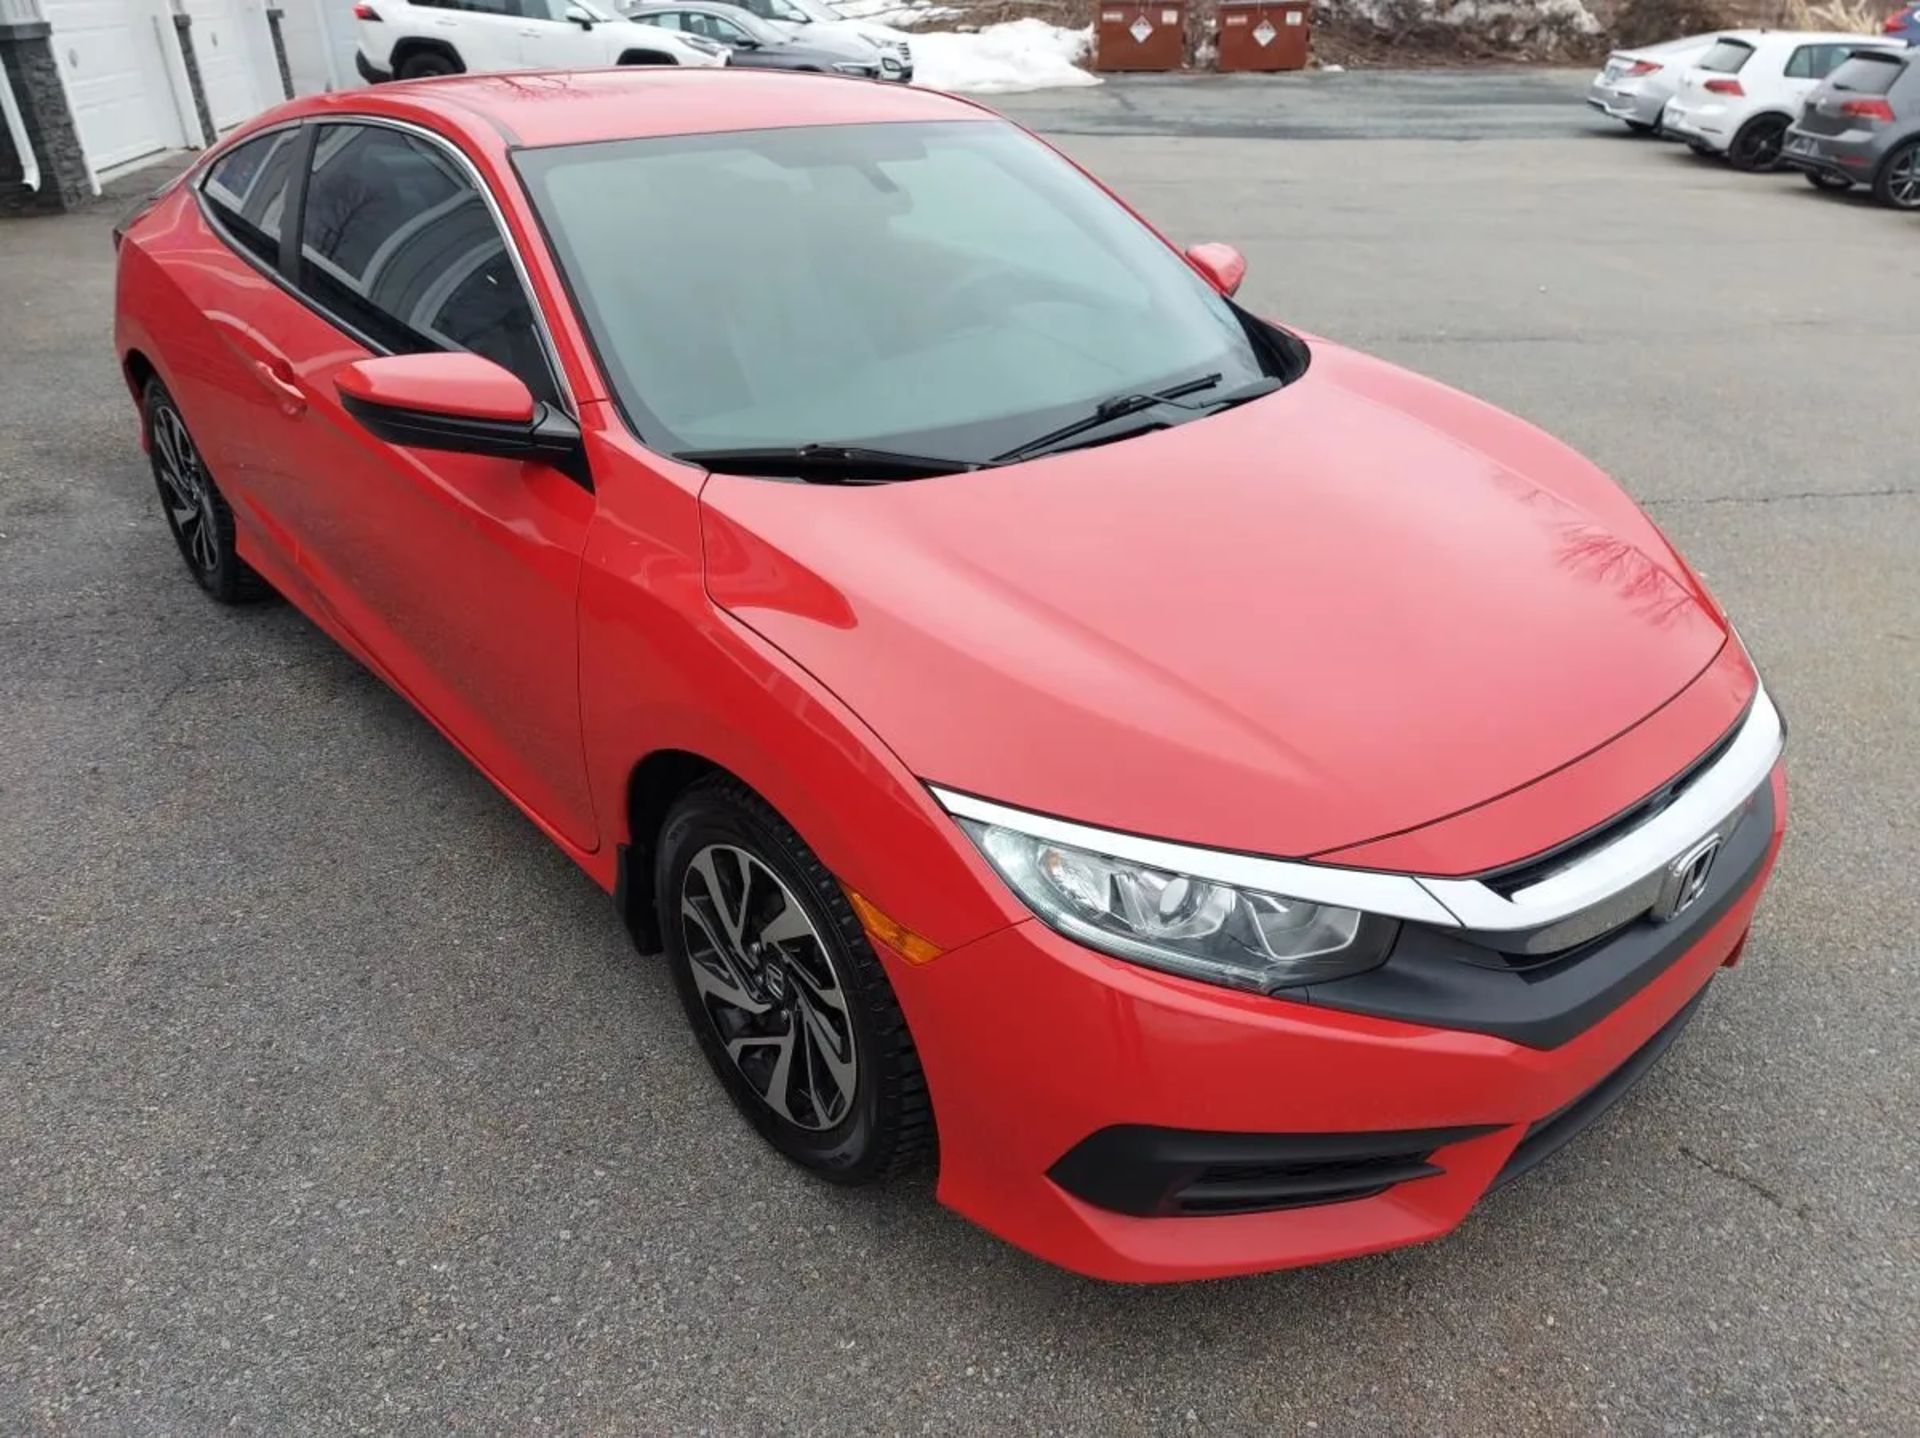 2017 HONDA CIVIC COUPE LX COUPE 6 SPEED! UNDERCOATED! DEALER SERVICED!